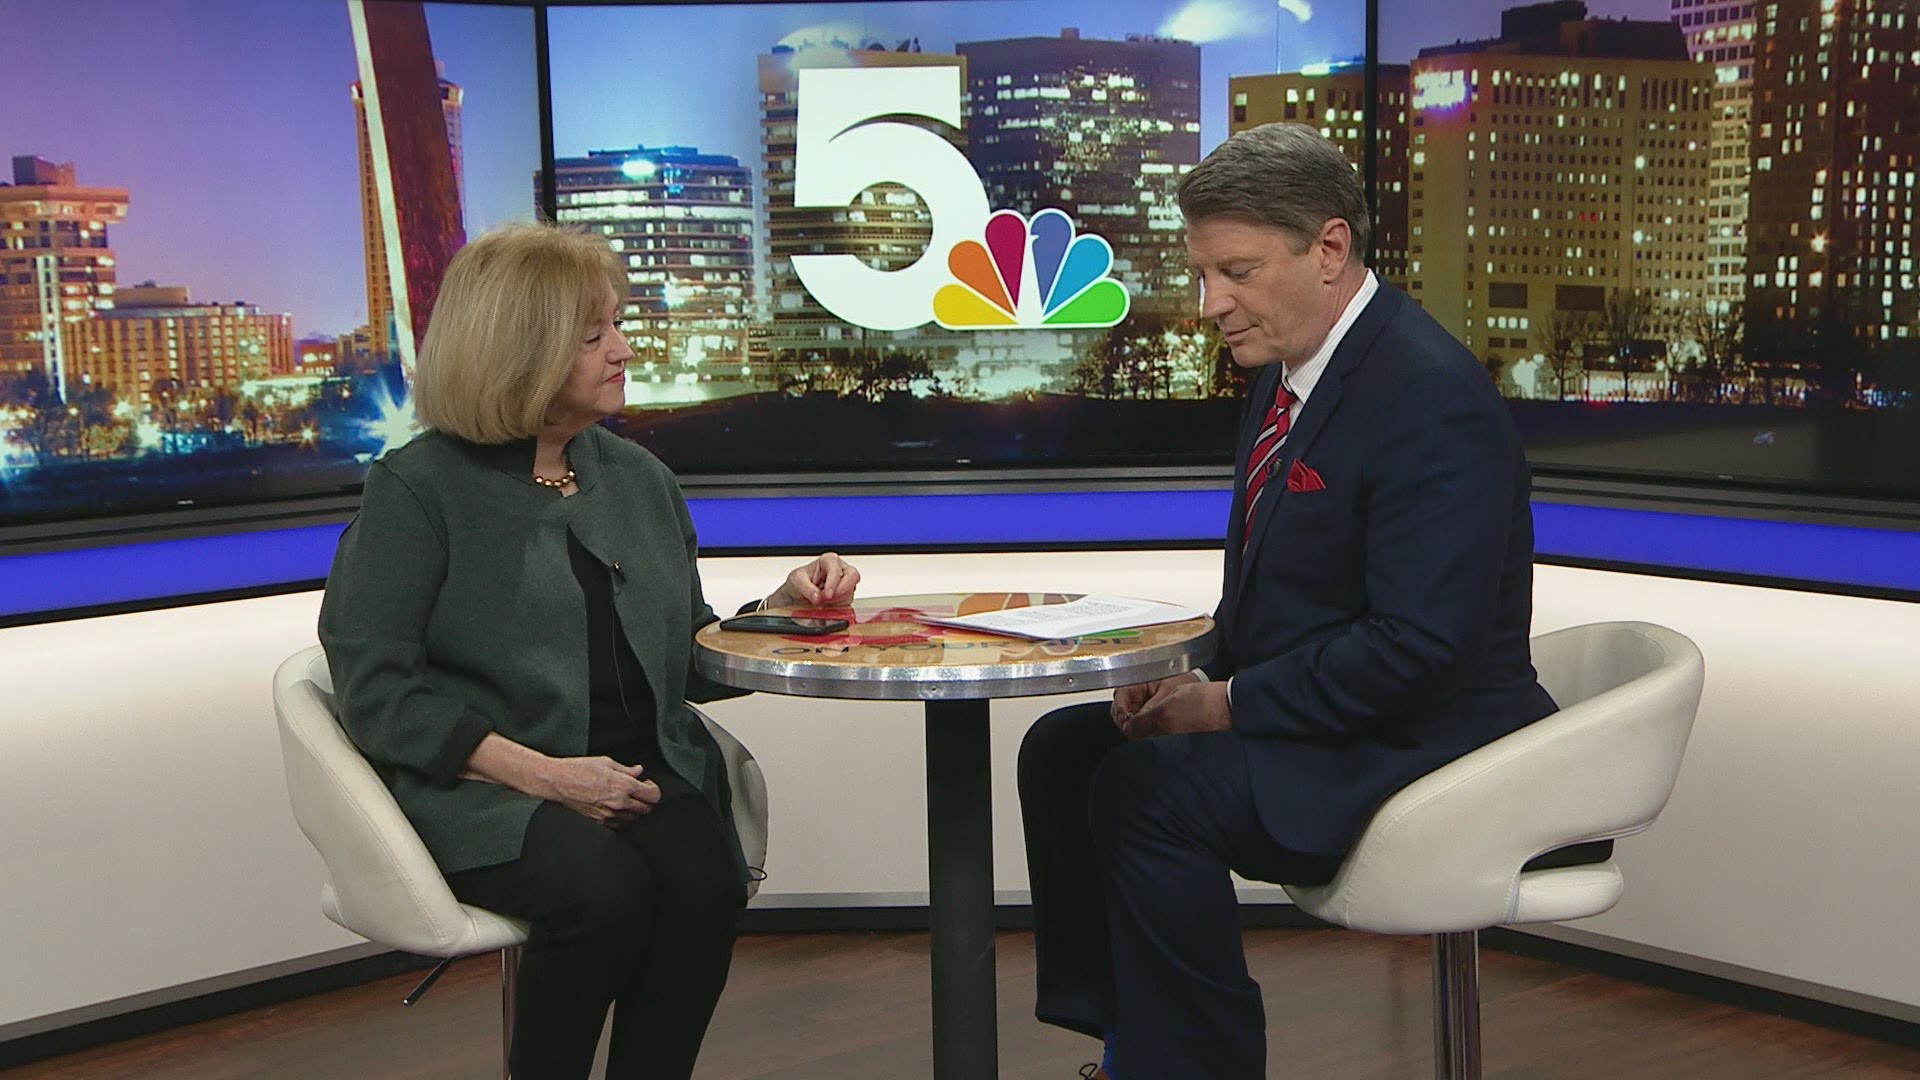 St. Louis Mayor Lyda Krewson visited the 5 On Your Side studios to sit down with Mike Bush.